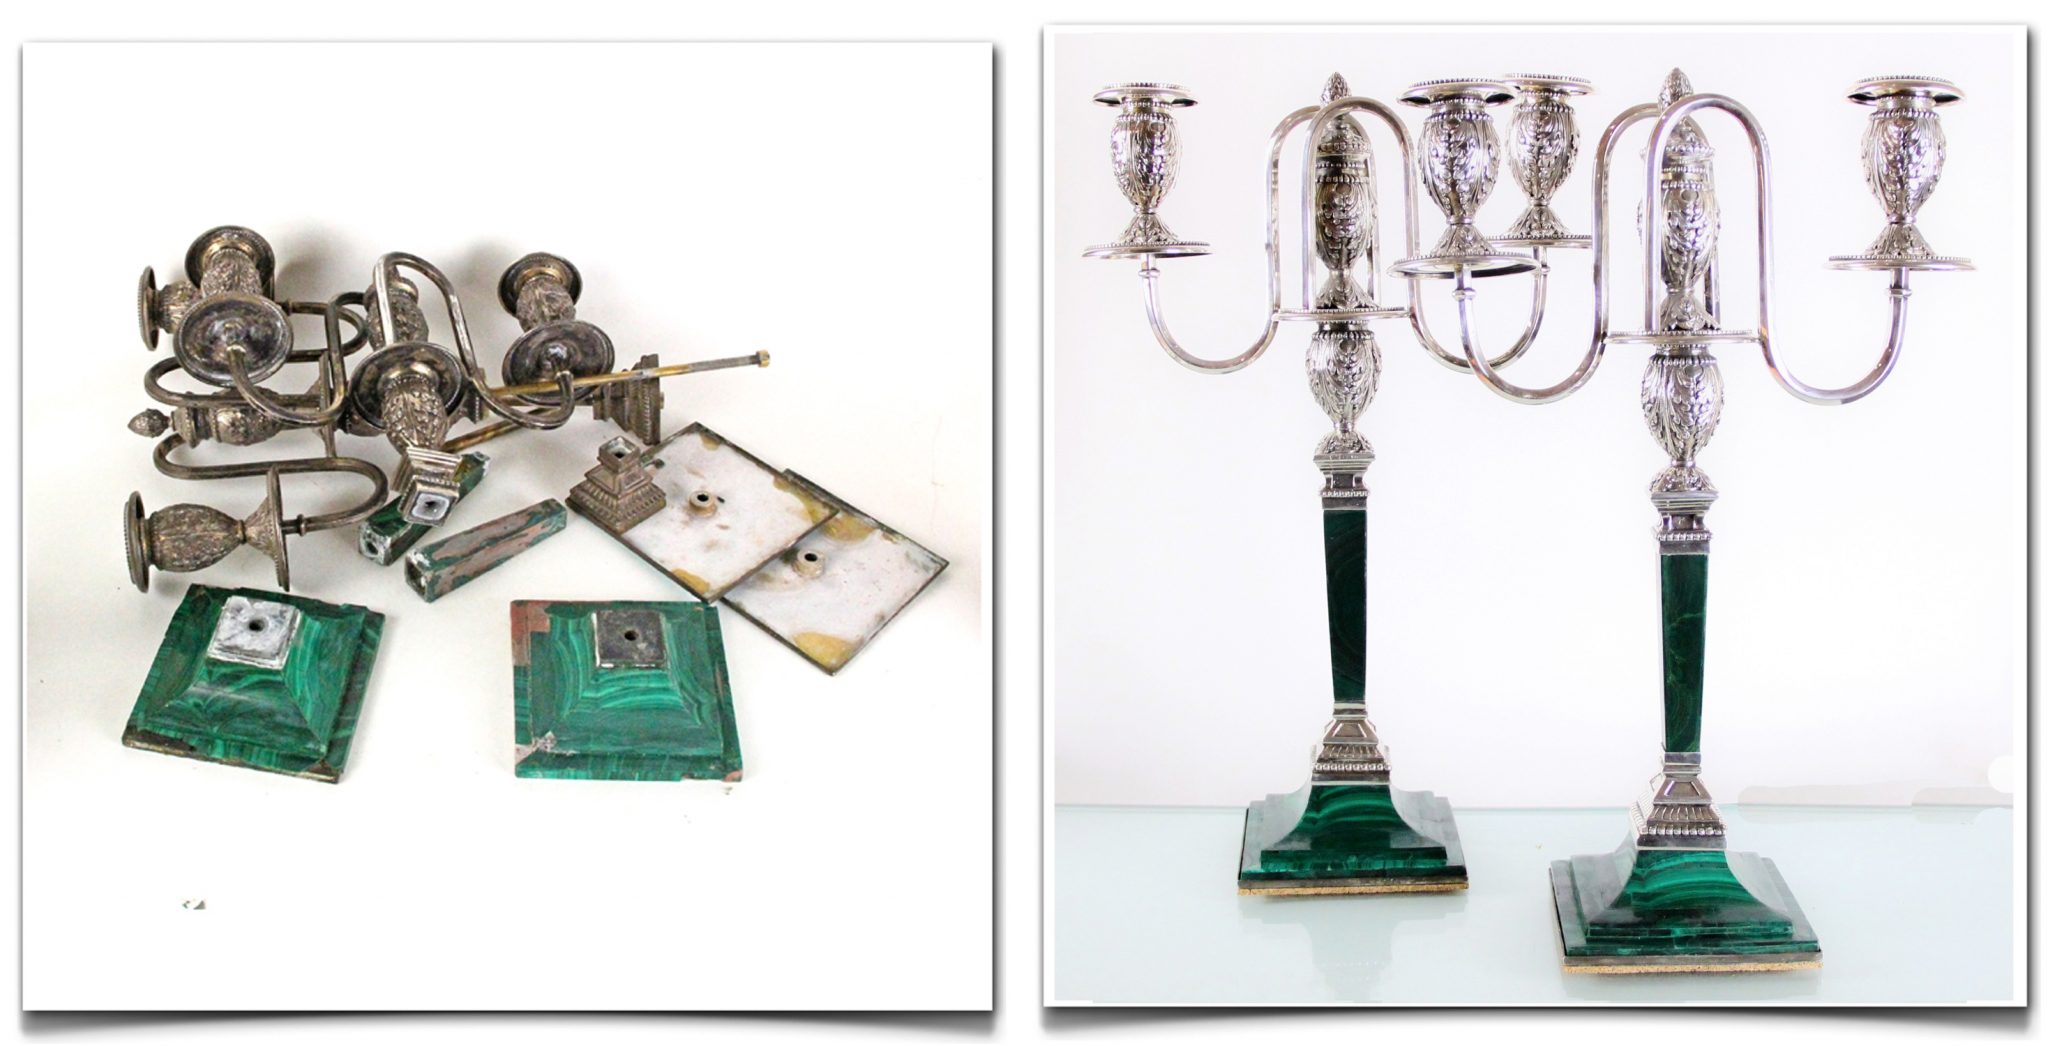 Restoration of Silver and Stone. Antique Candelabras with Russian Silver Marks.